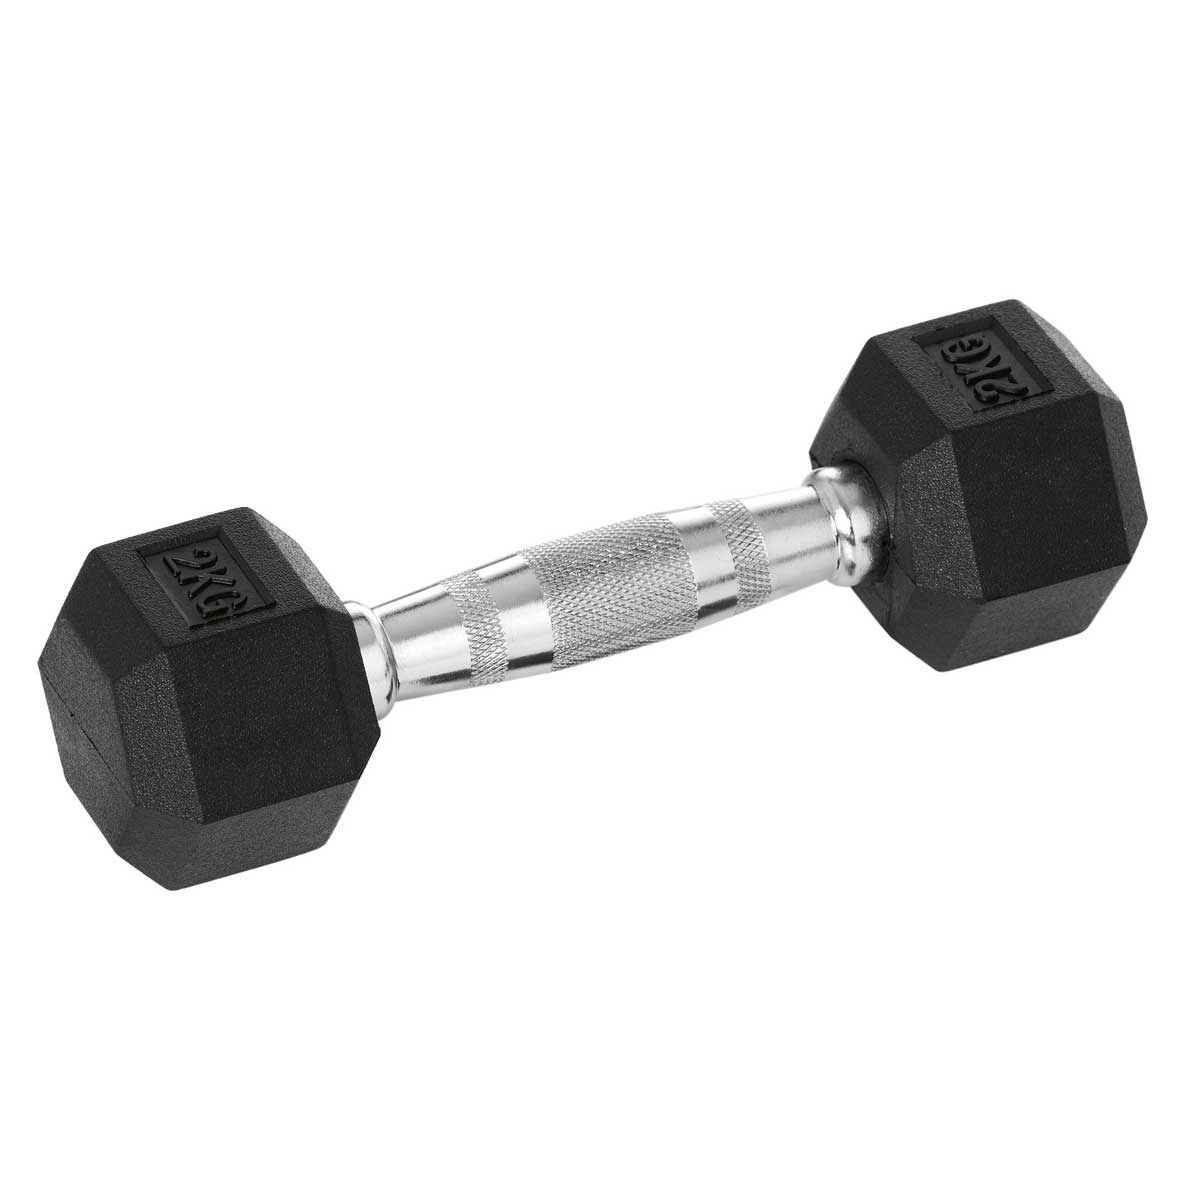 nike weights and dumbbells